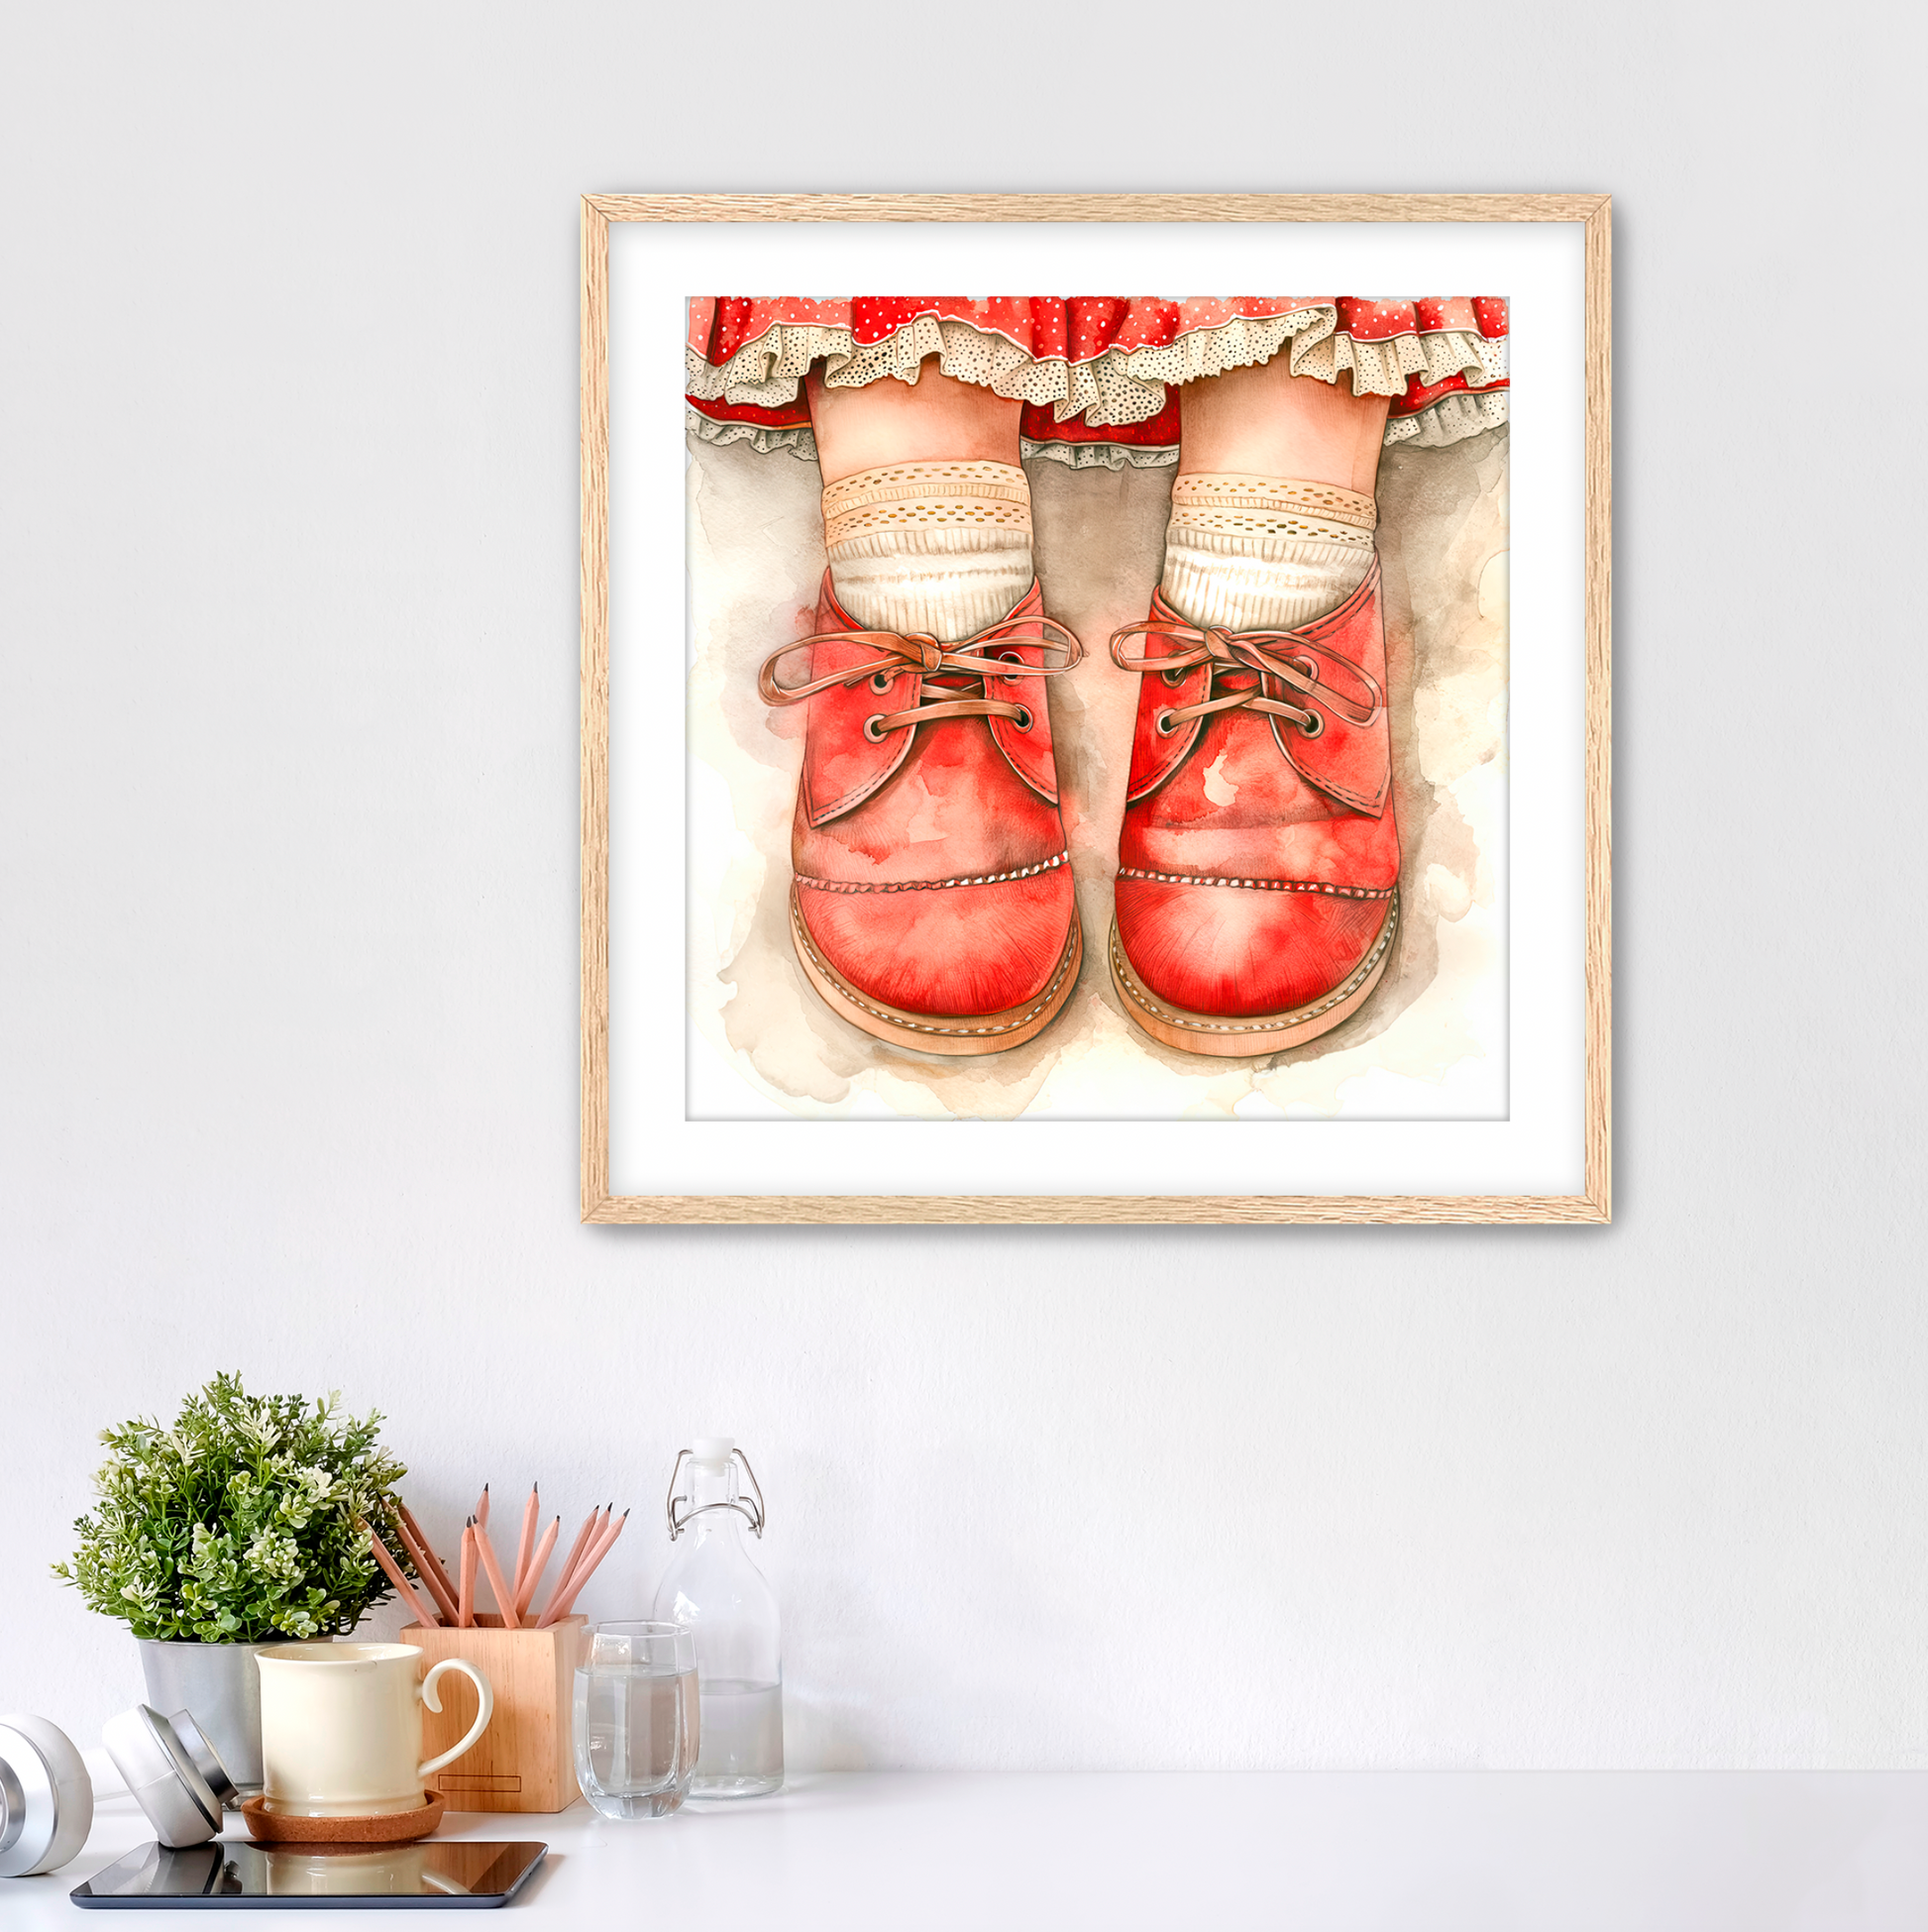 Adorable wall art for kids. Watercolor vintage ensemble showing little girls red shoes closeup with eyelet lace socks and red skirt with tiny white polka dots and lace trim hem. Framed in solid oak with white mat. Art for sale at customconcepts.art